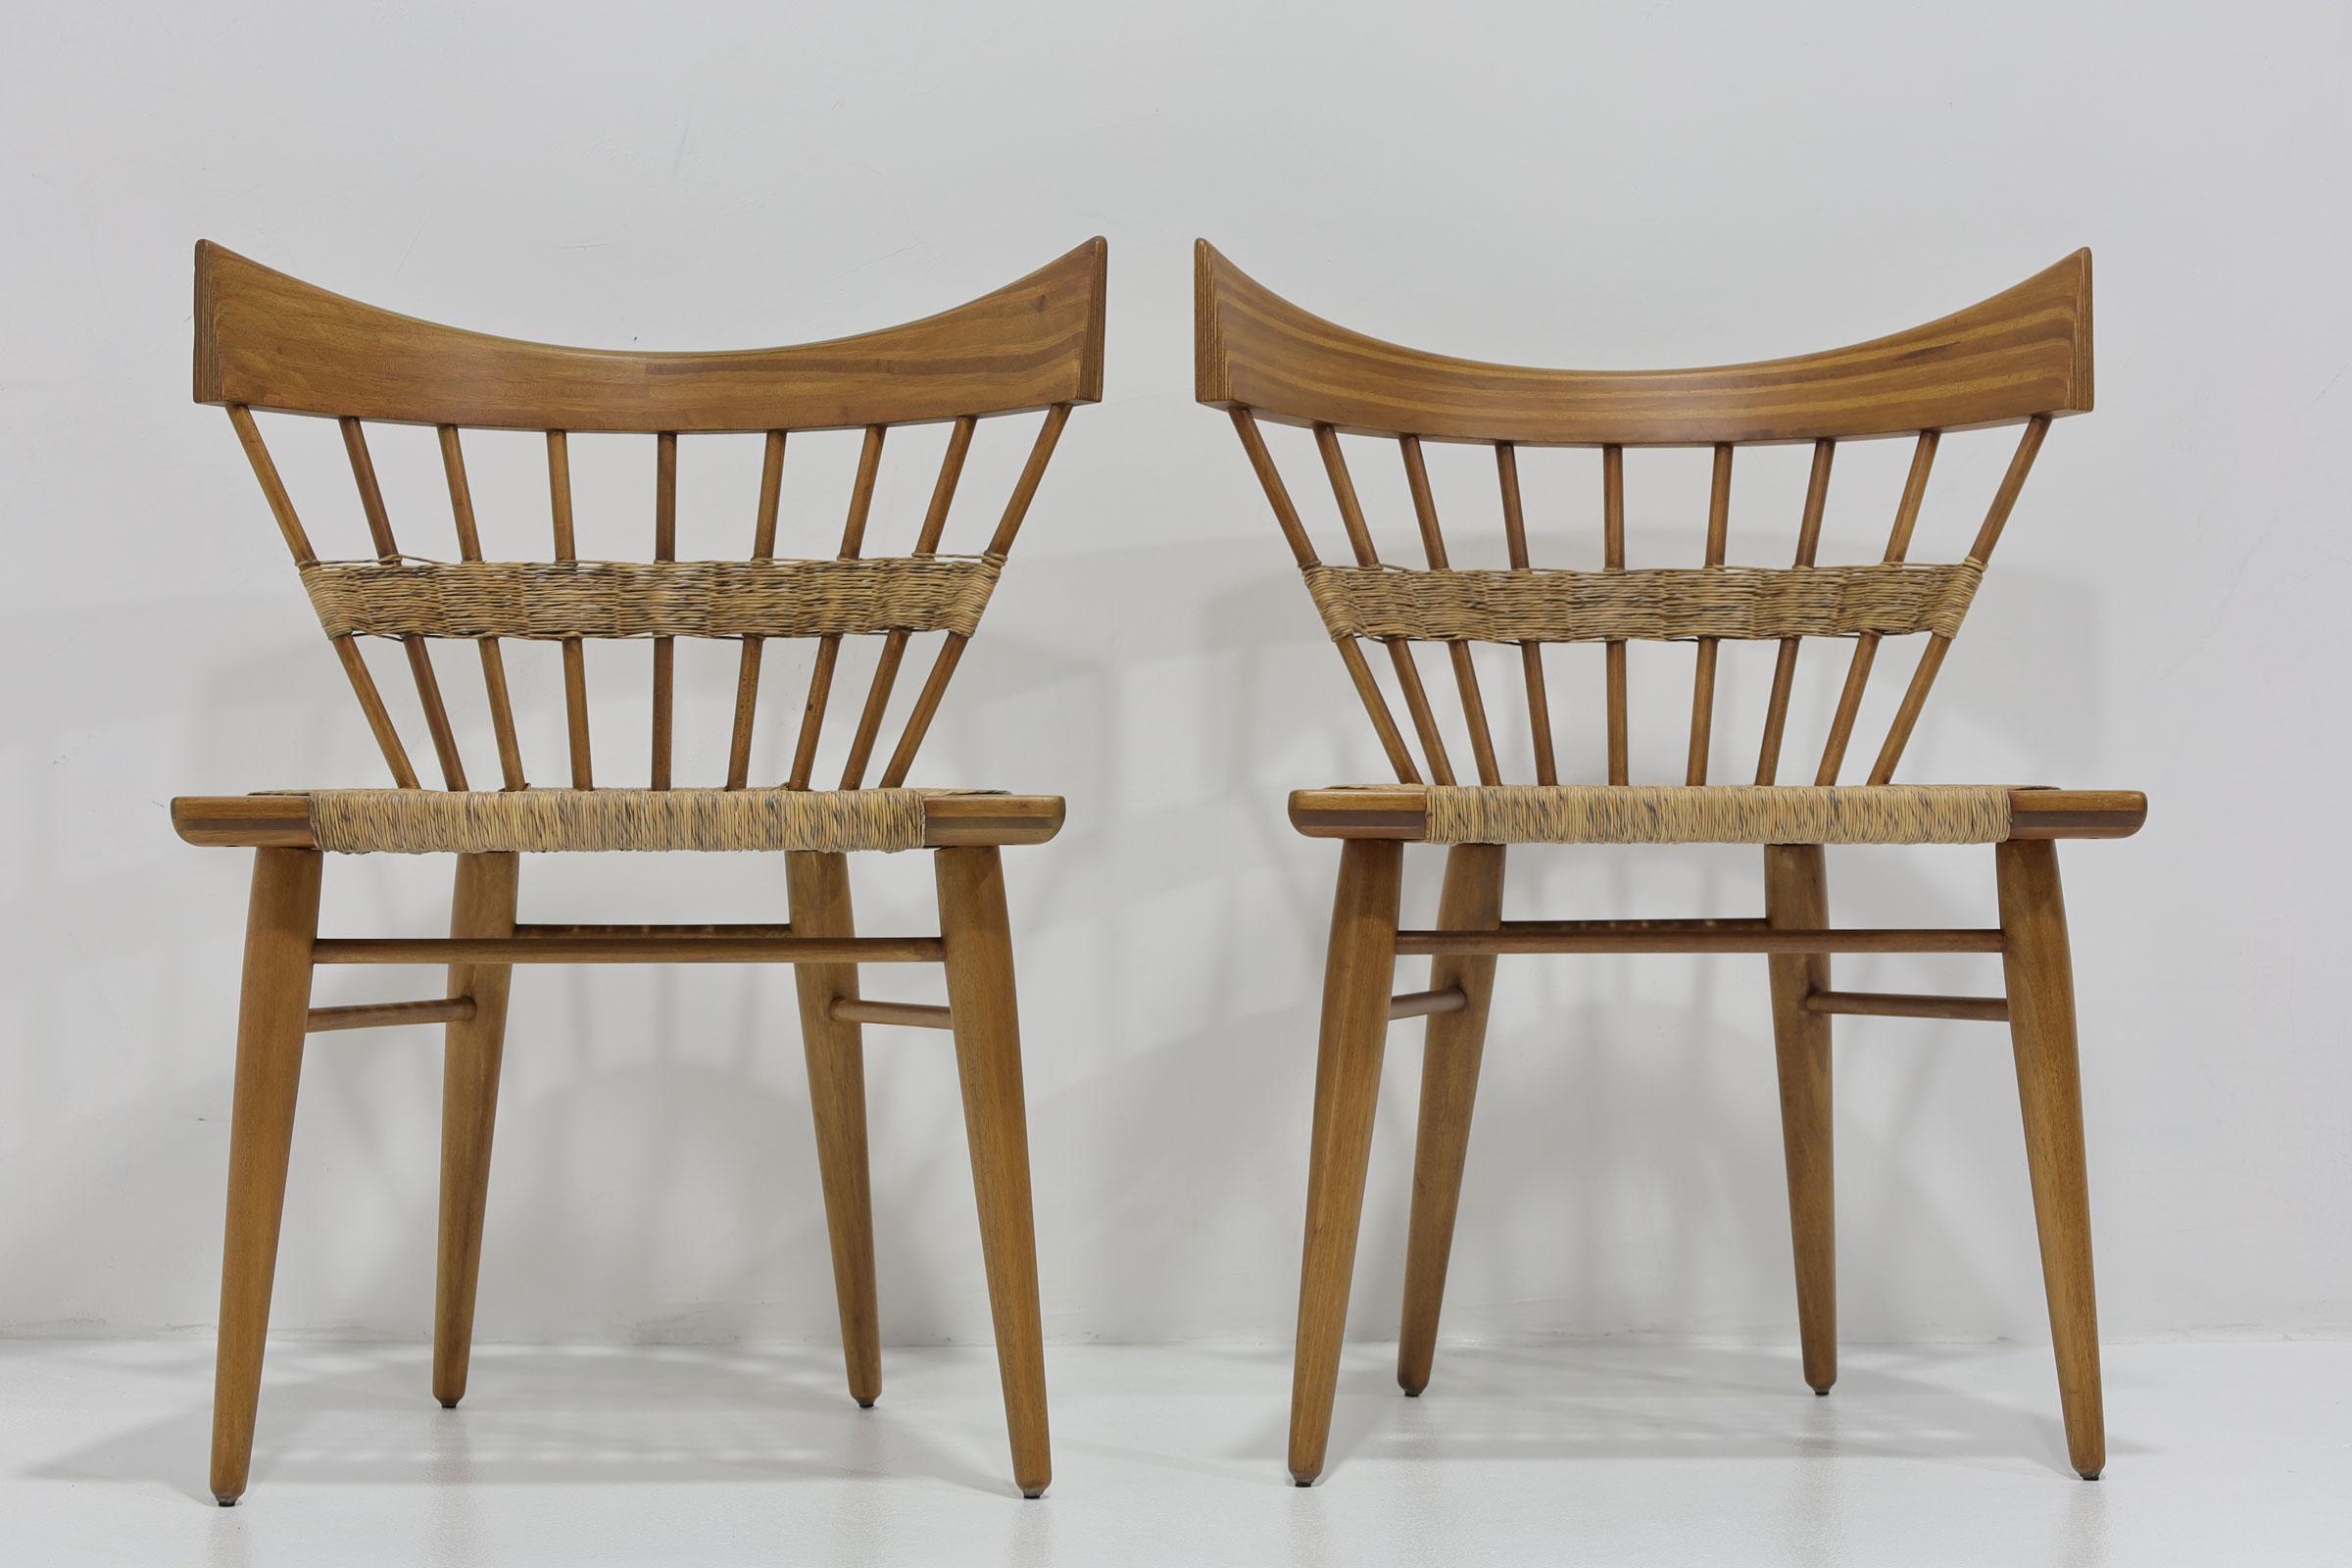 Beautiful set of 2 Mexican modernist 'Yucatan' dining chairs designed by Edmond J. Spence made of mahogany and woven seagrass, Mexico, the 1950s. The seagrass is in great condition and the chairs have been refinished.

